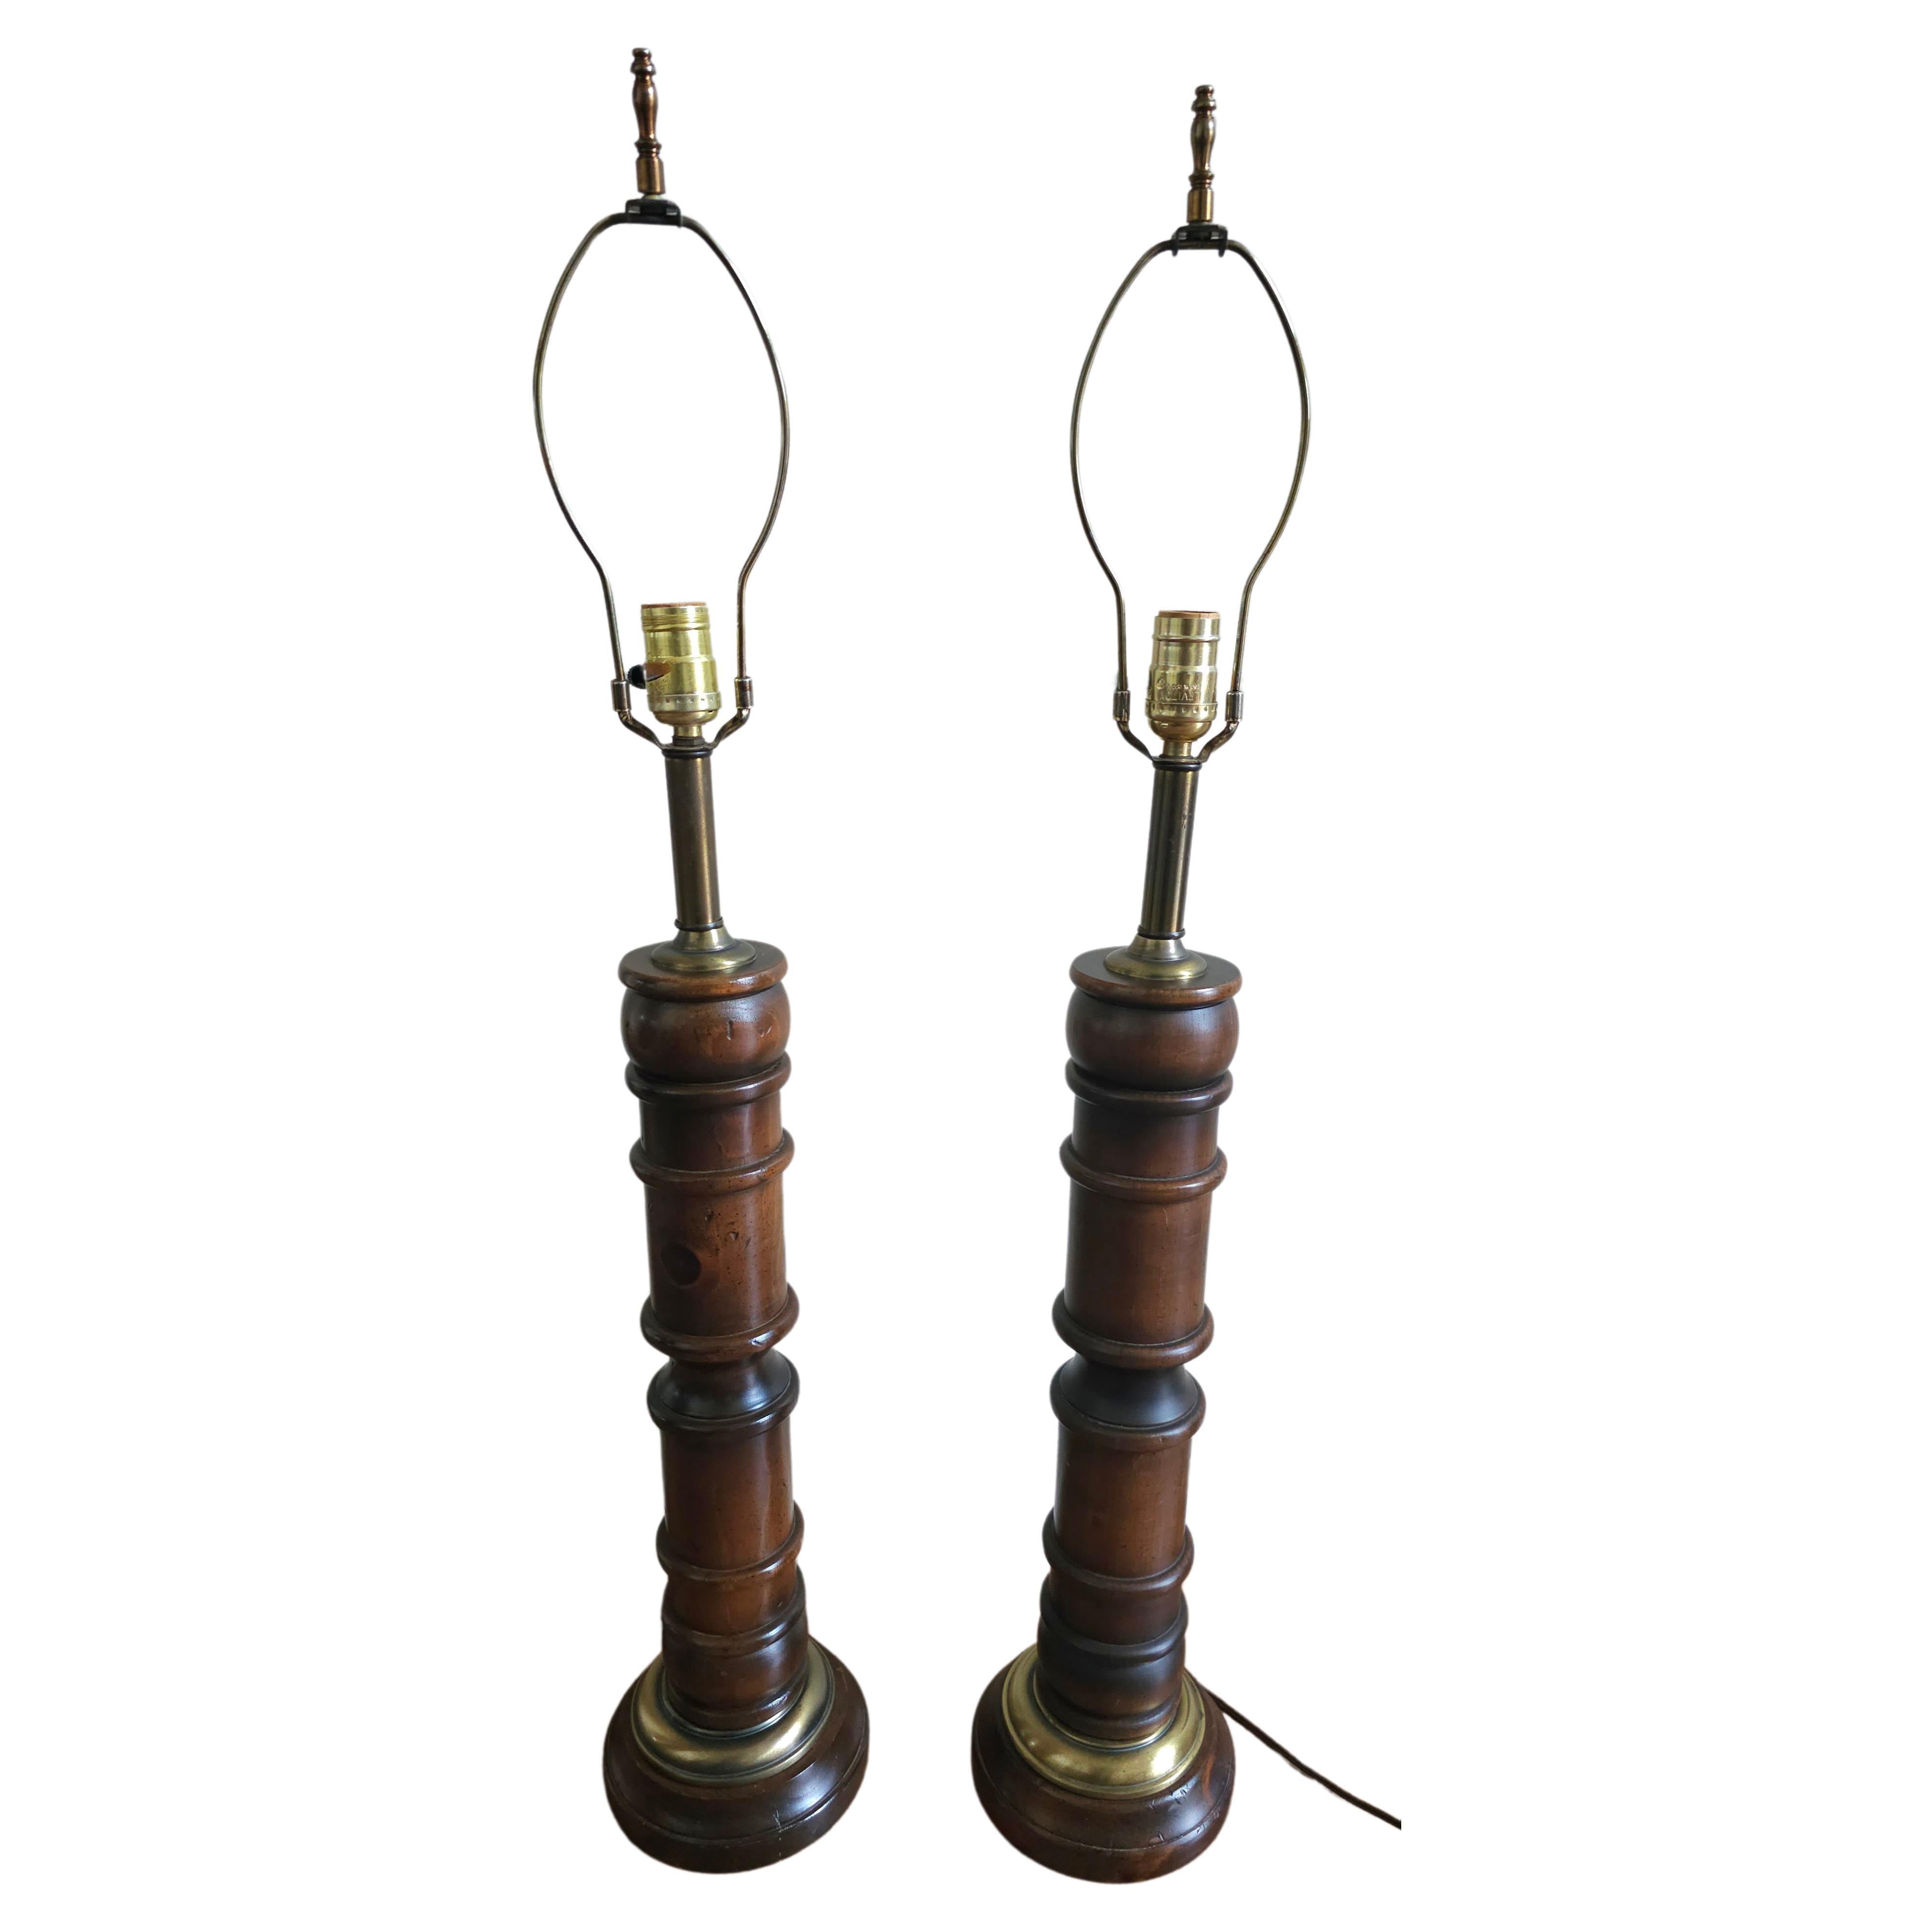 A Pair Of Antiqued Pine Wood and Brass Column-Form Table Lamps in great vintage condition. Measures 6.5